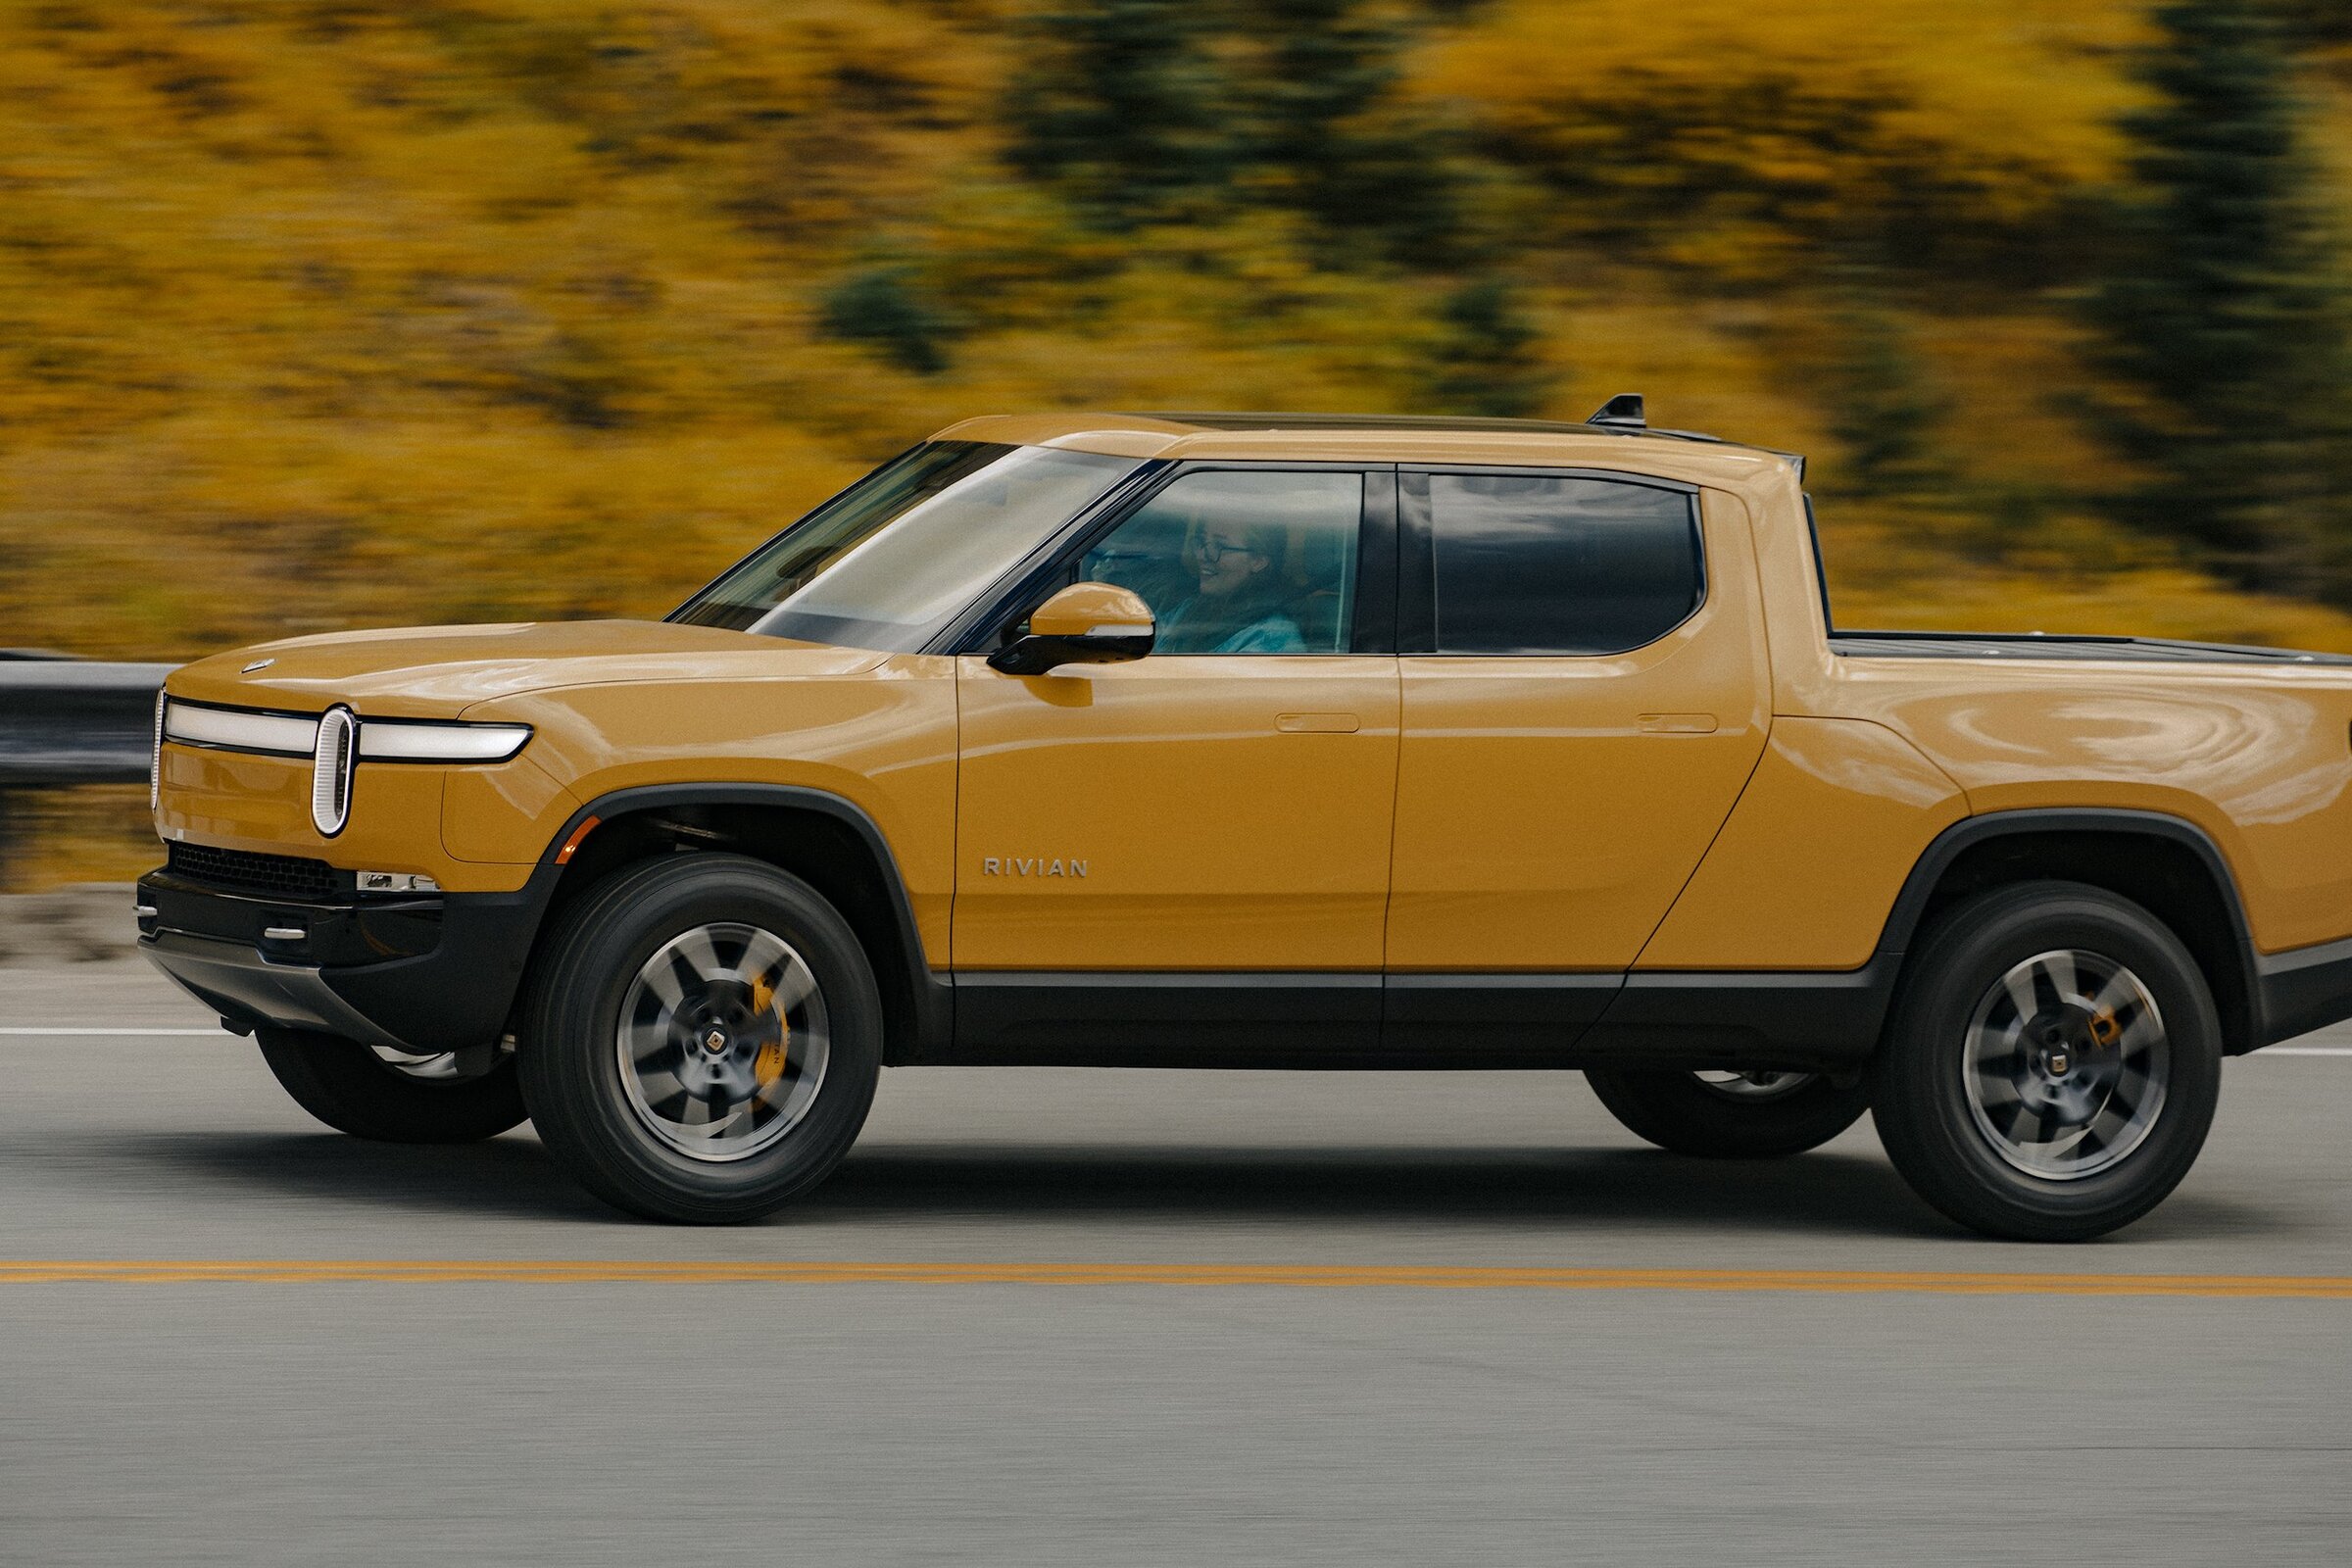 Rivian R1T R1S Rivian Colors Feature (including Limestone!!): EARTH TONES - The inspiration behind the Rivian palette. original.jpg;resize(2600,_)(13)